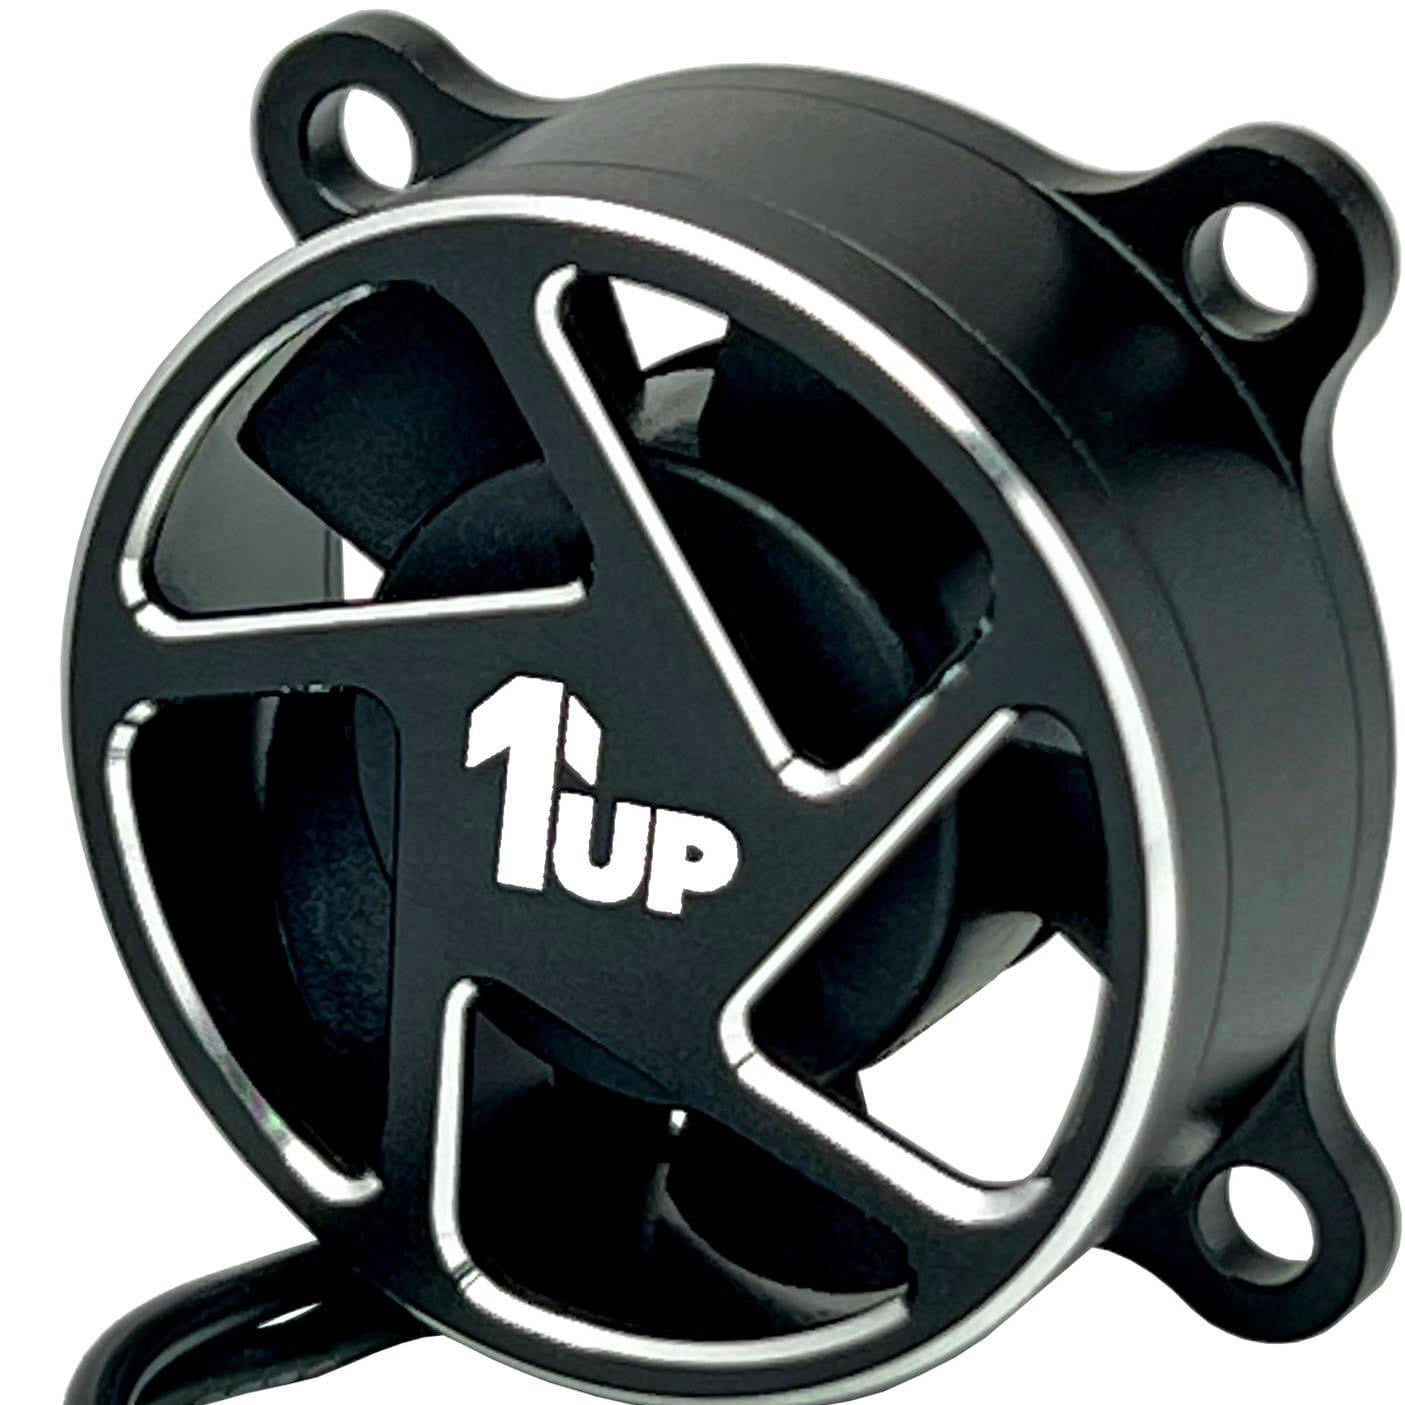 The Coolest way to Cool your Electronics with 1up Racing's Newest Fan